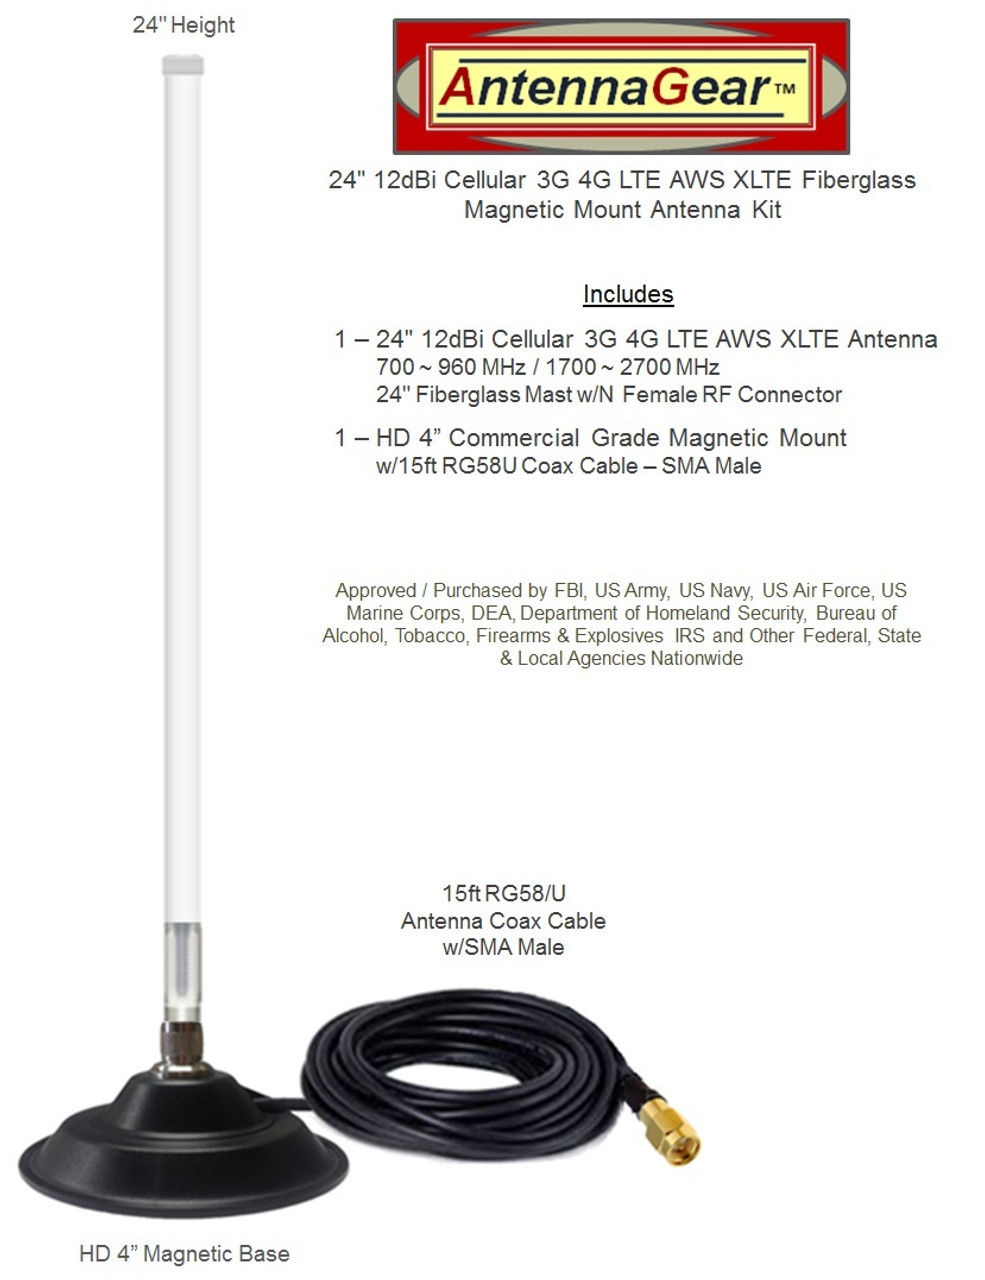 Antenna for Sierra Wireless LX60 Router - M1200 Fiberglass Antenna Cellular  4G 5G LTE AWS XLTE M2M IoT with Mag Mount.